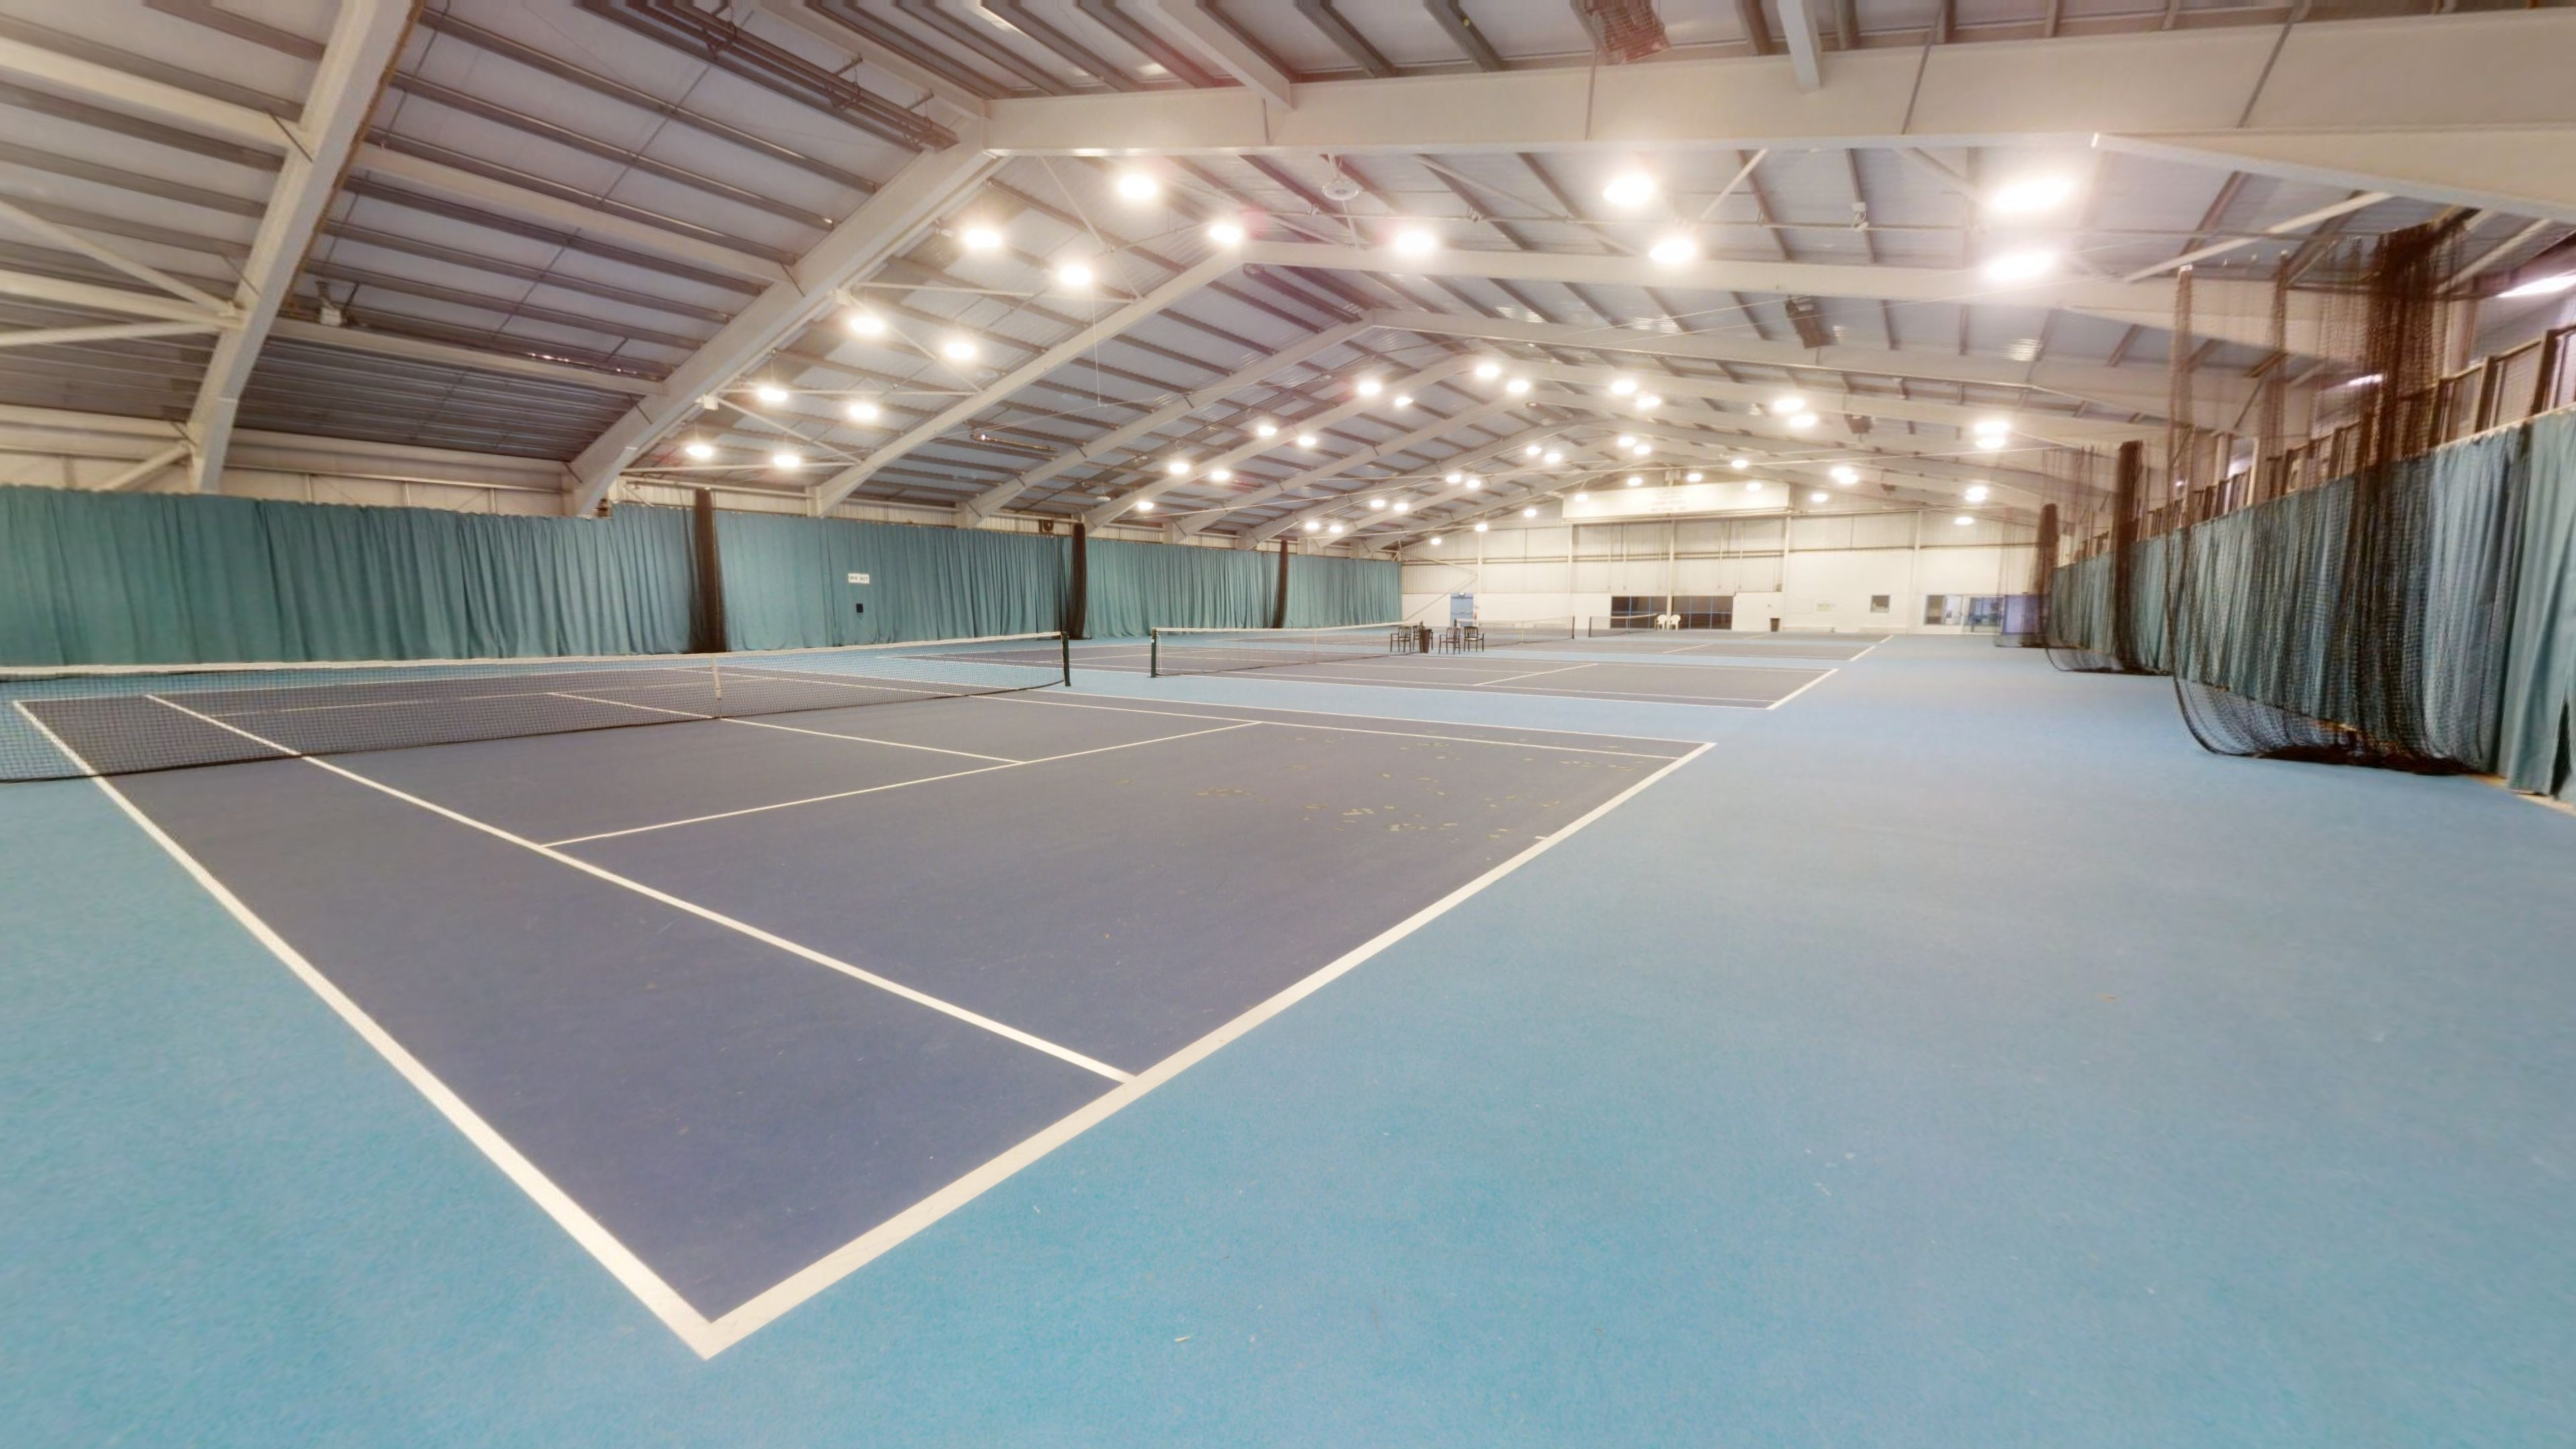 Tennis at Graves Health and Sports Centre Graves Health and Sports Centre Sheffield 01142 839900